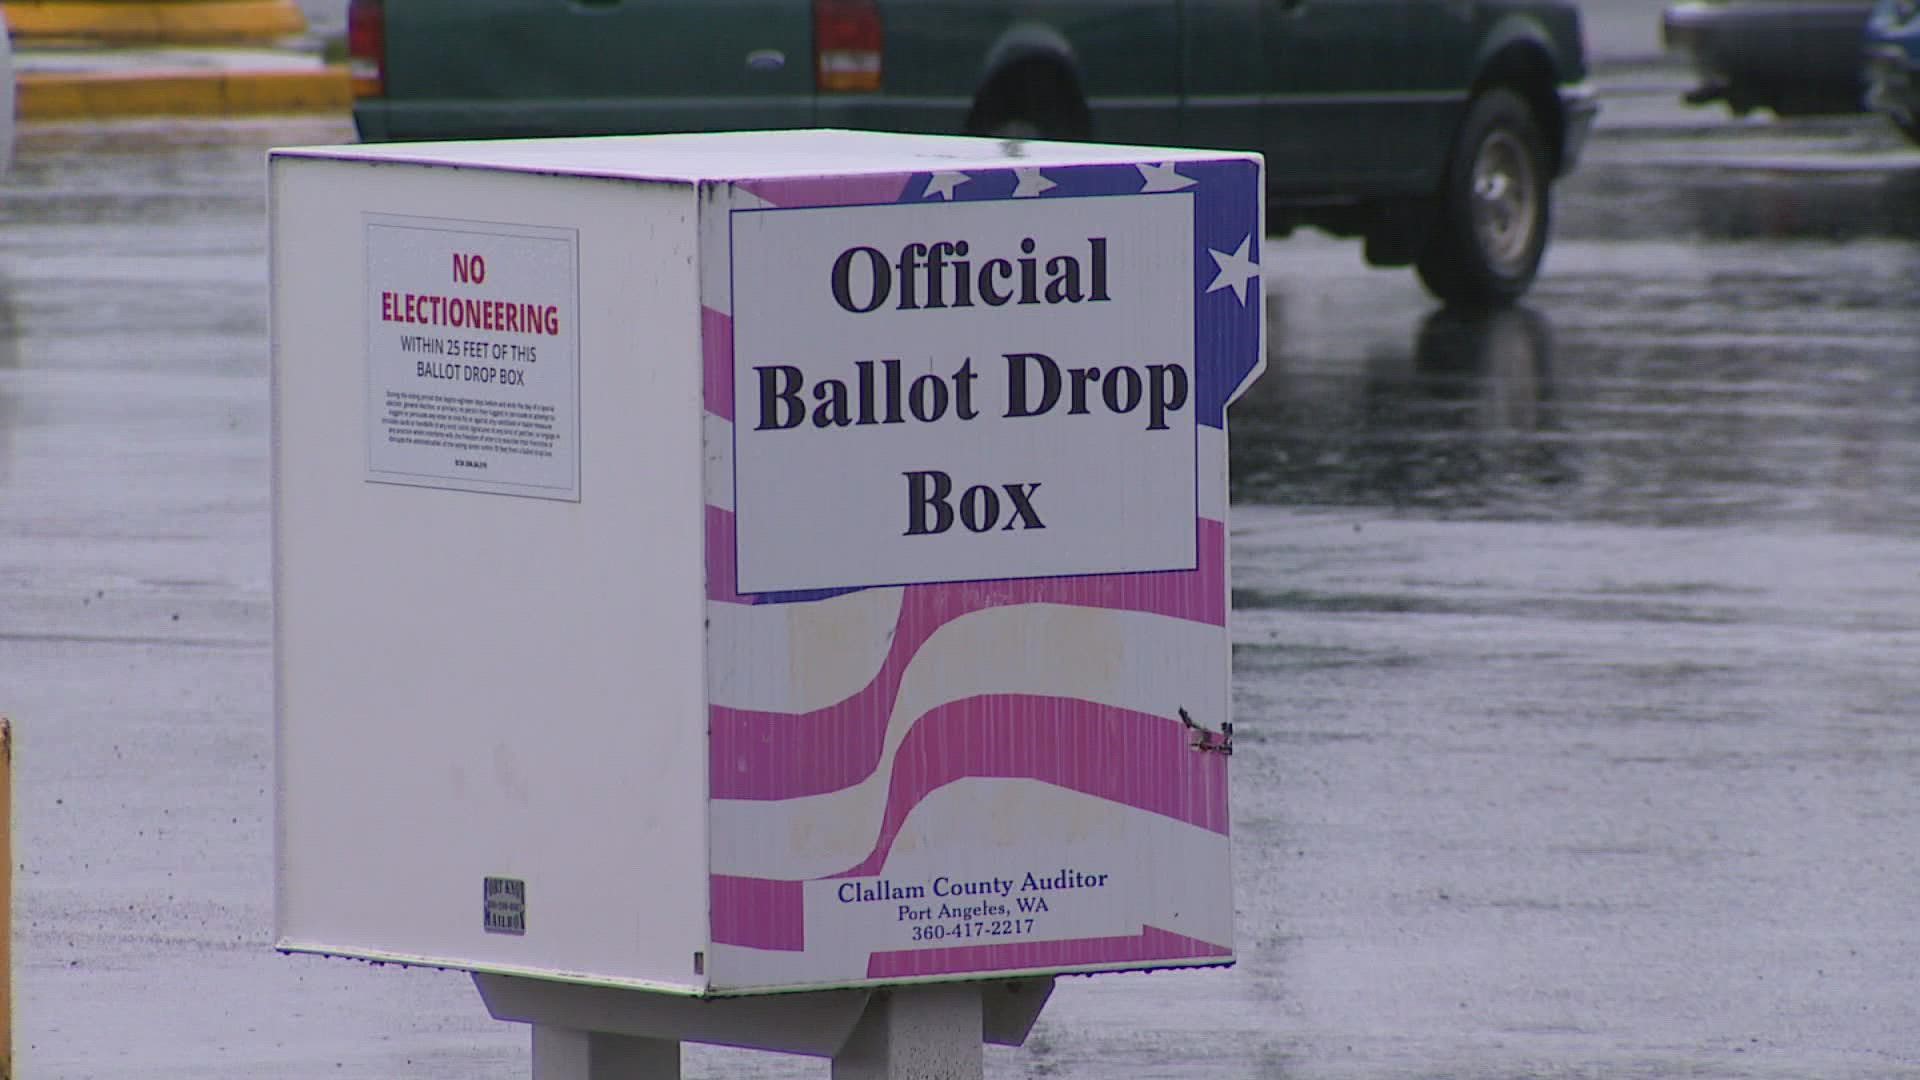 Some people have reported feeling intimidated as they drop off their ballots.